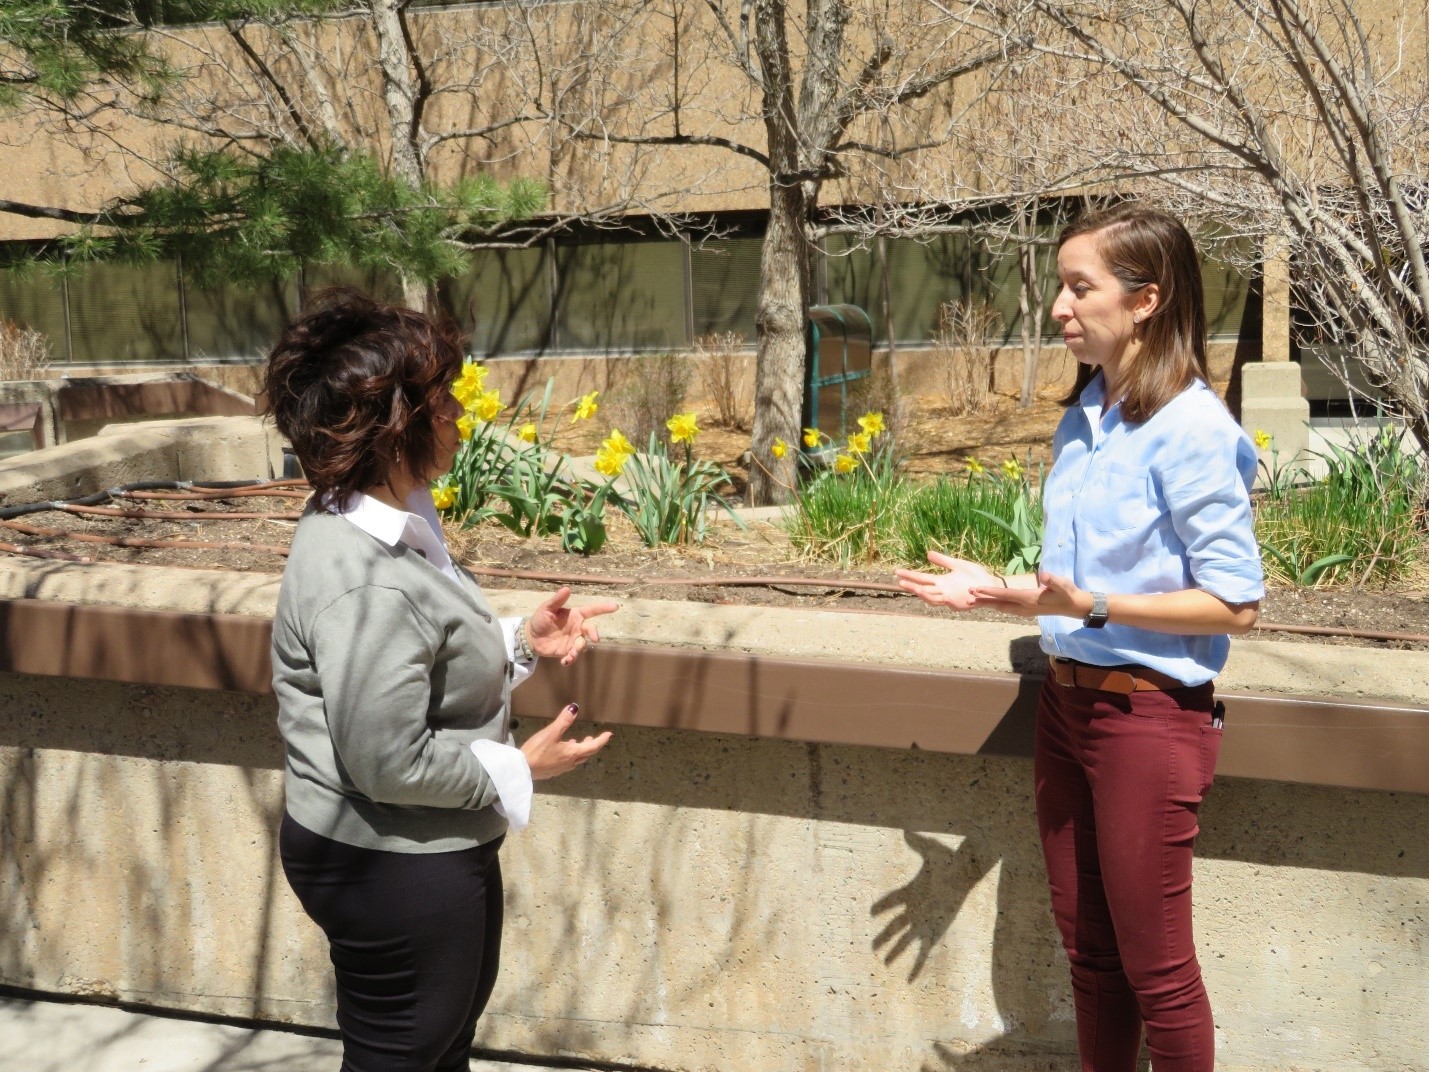 Brittany Gonzalez speaks to a colleague outside.